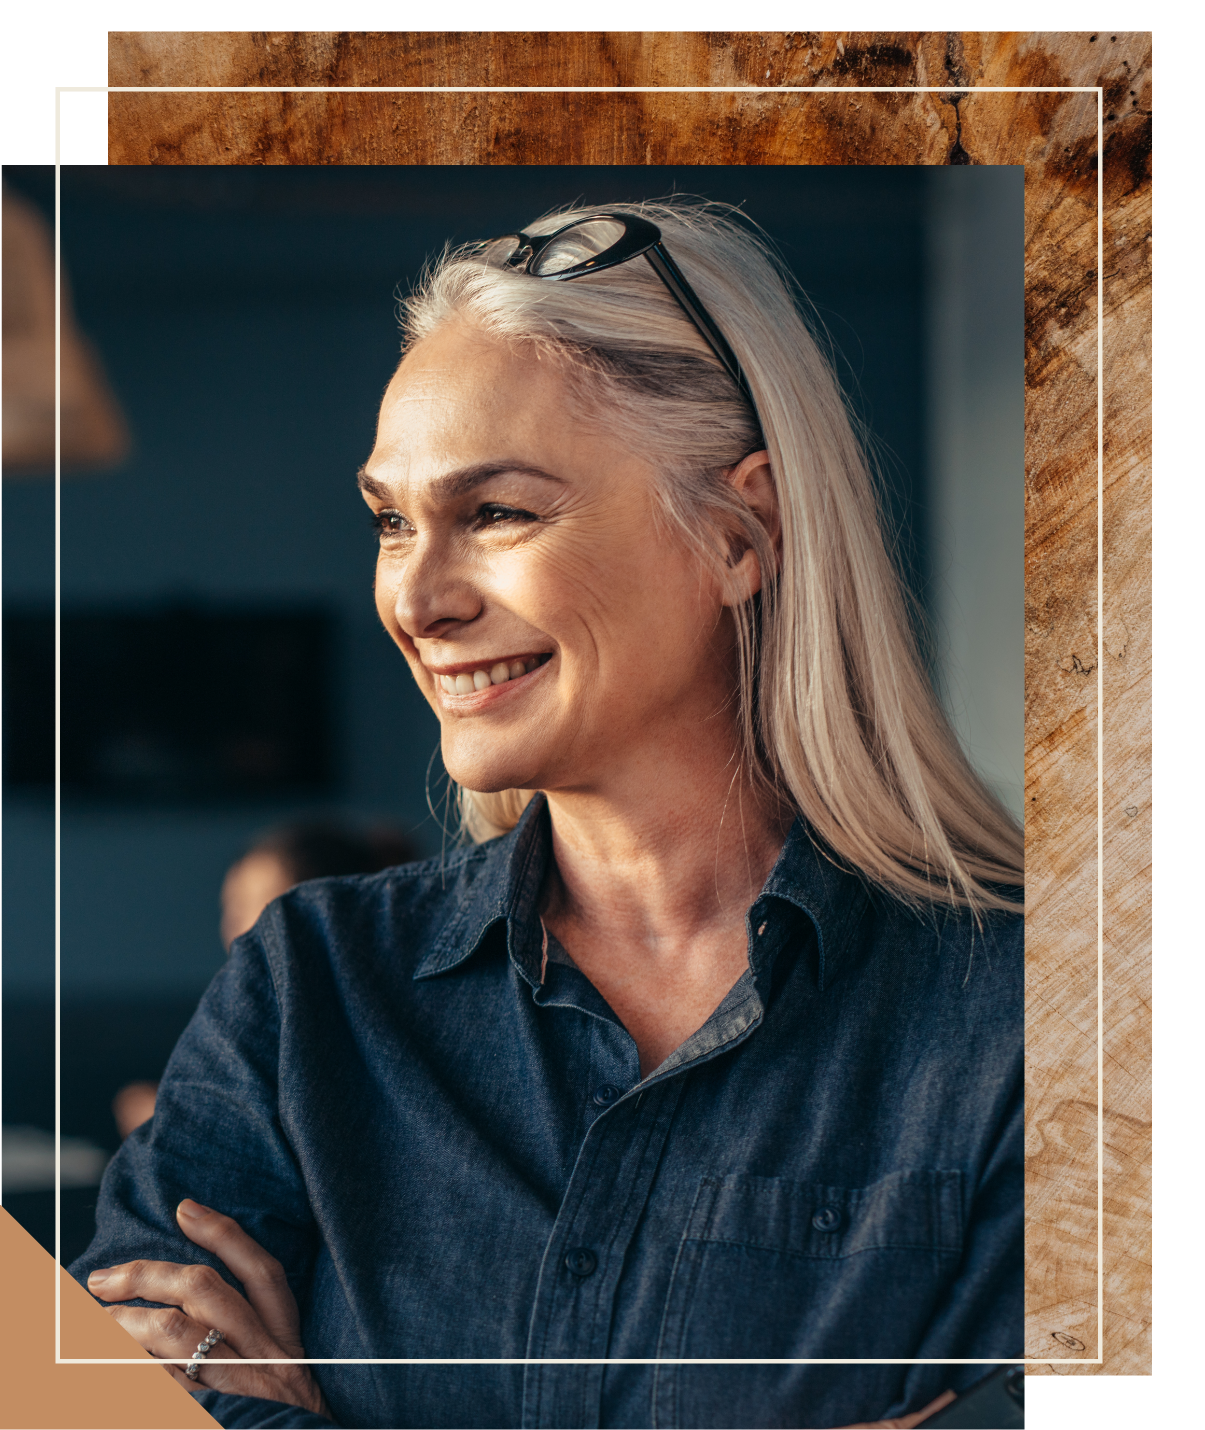 Slate 55+ apartments senior woman portrait smiling with wood texture background